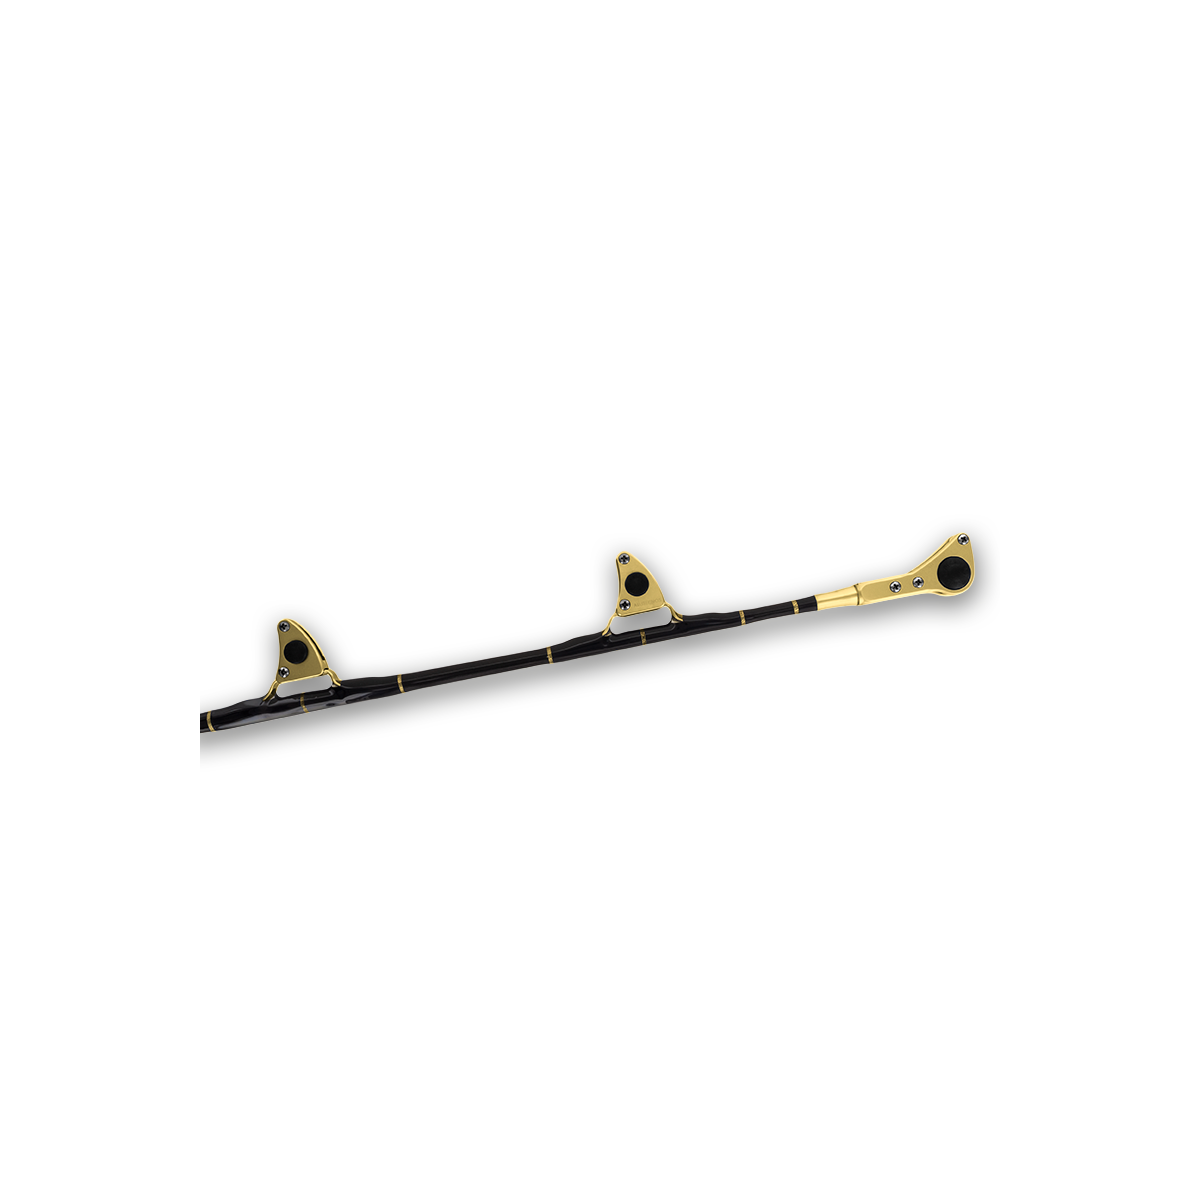 Alutecnos Albacore Stand-Up Rod / Roller